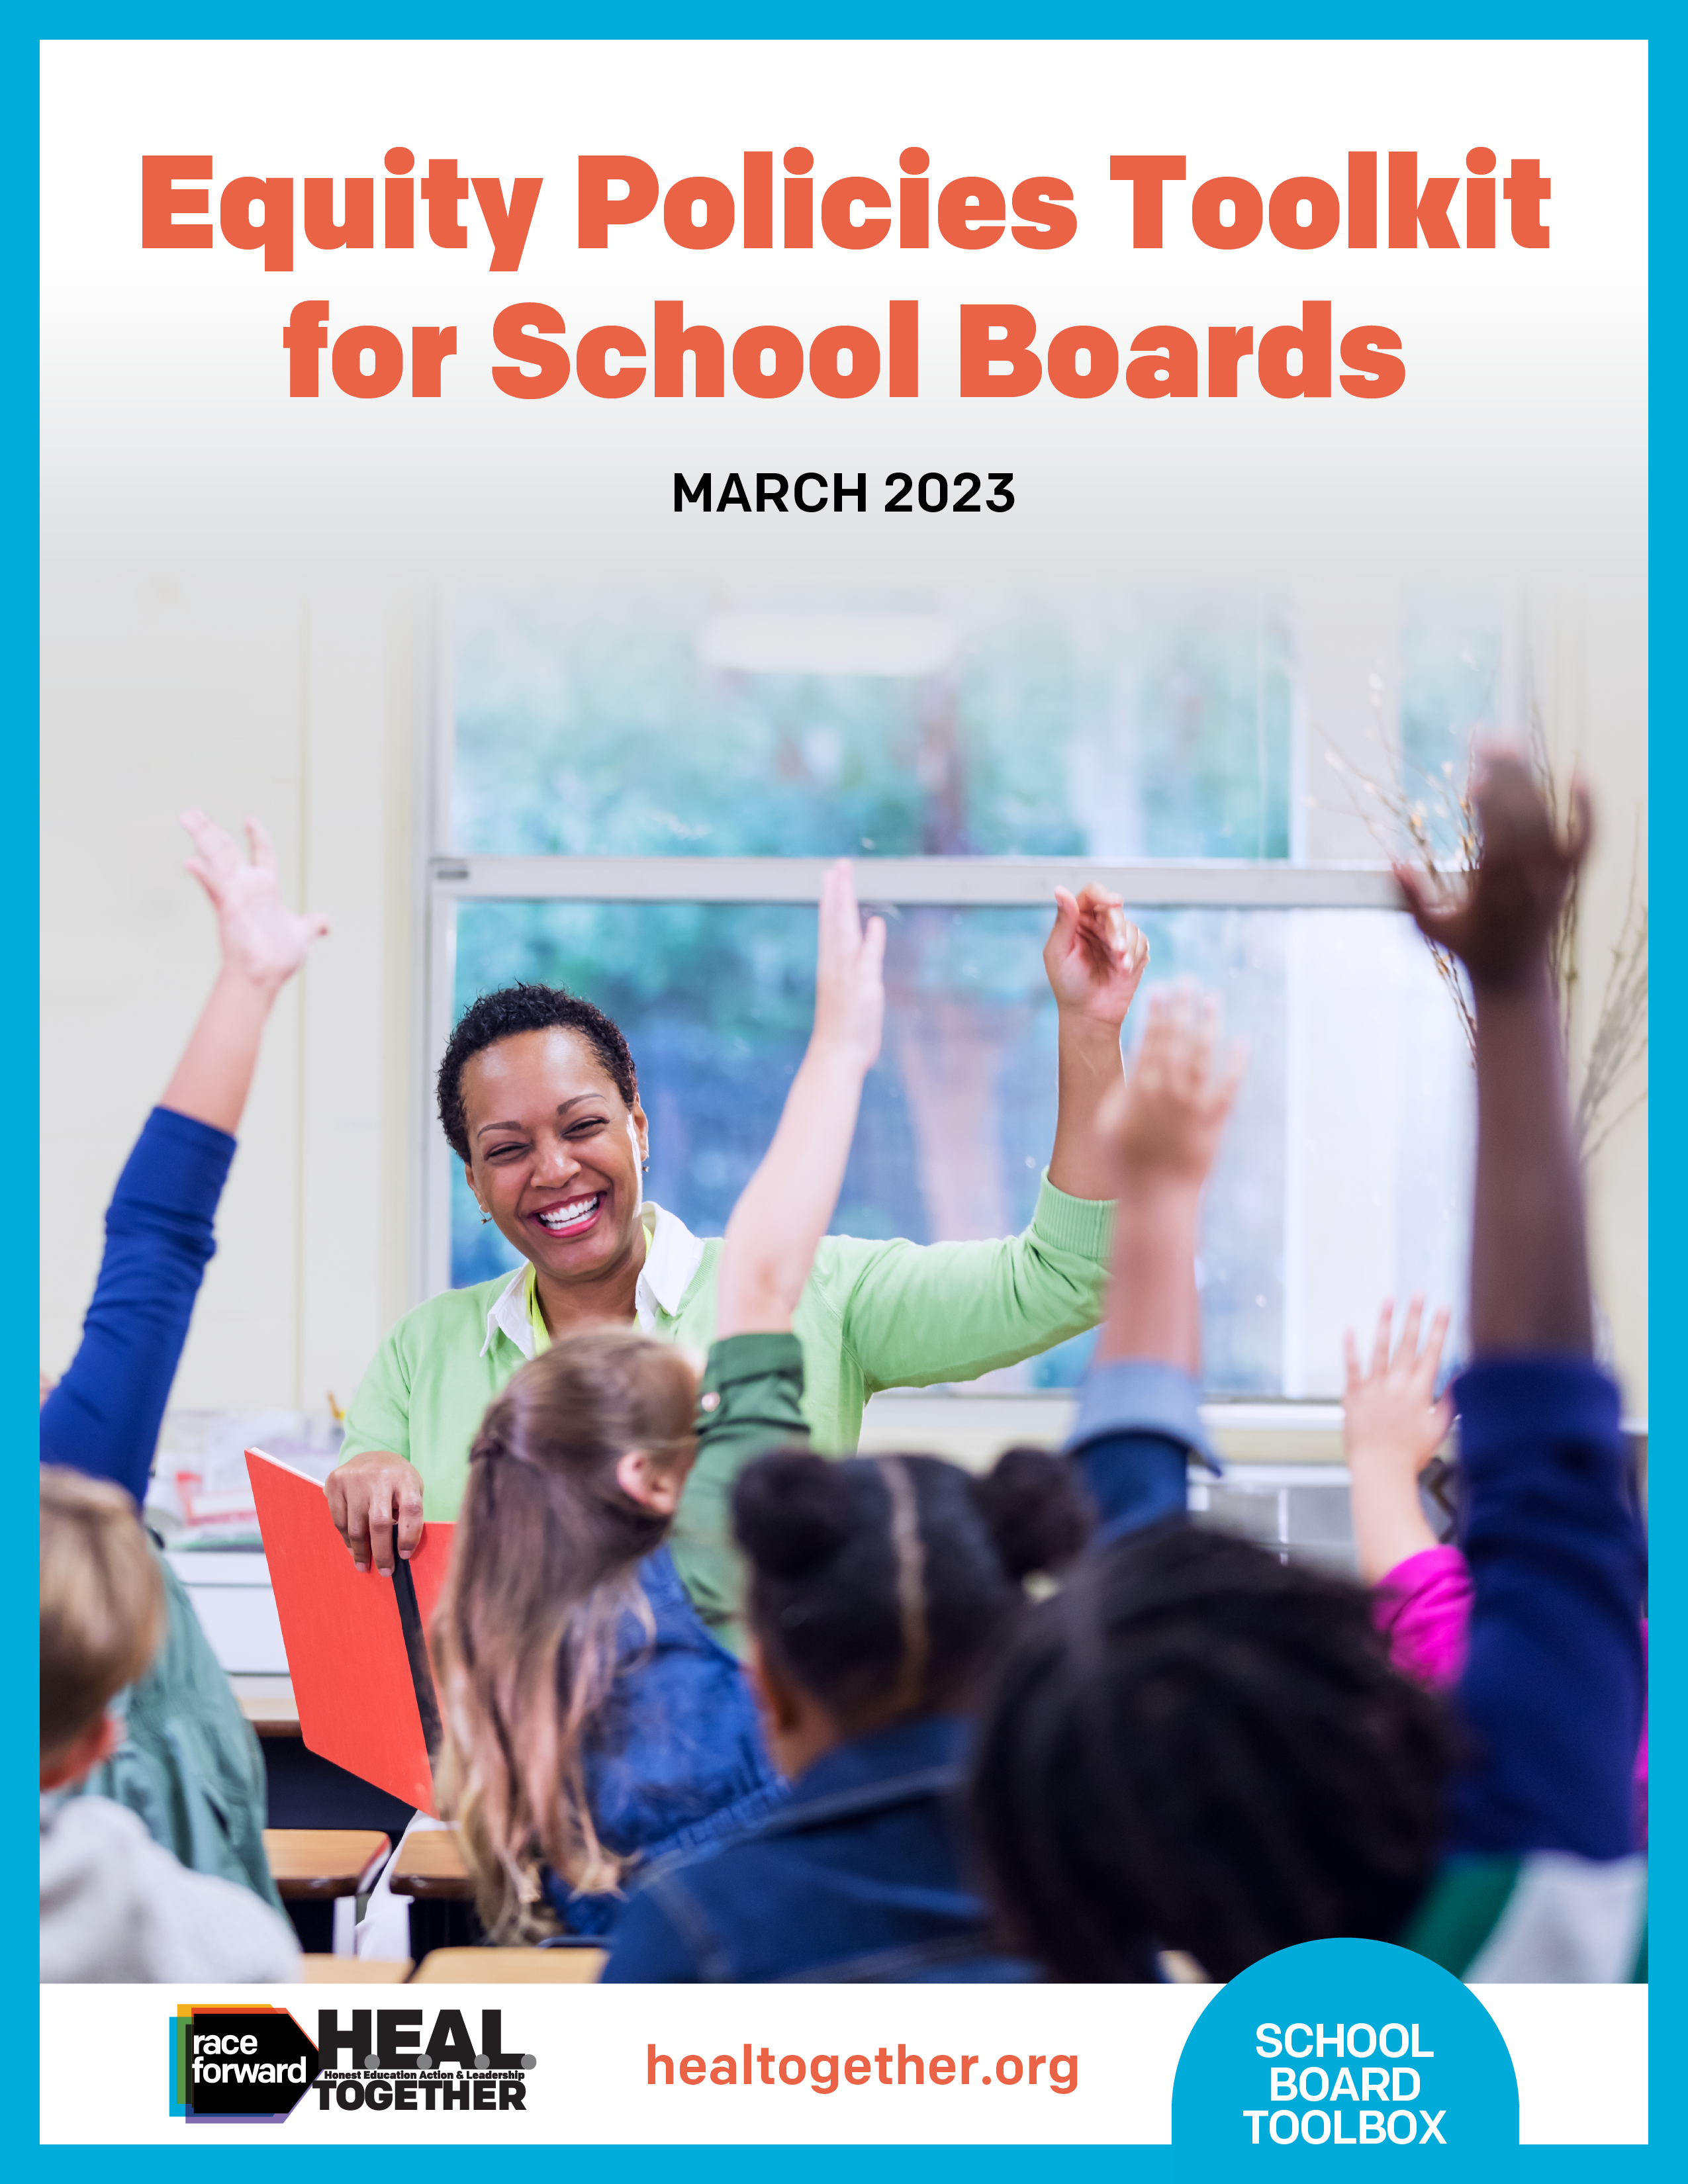 Teacher with book in front of a classroom of children with their hands raised, with text reading: Equity Policies Toolkit for School Boards